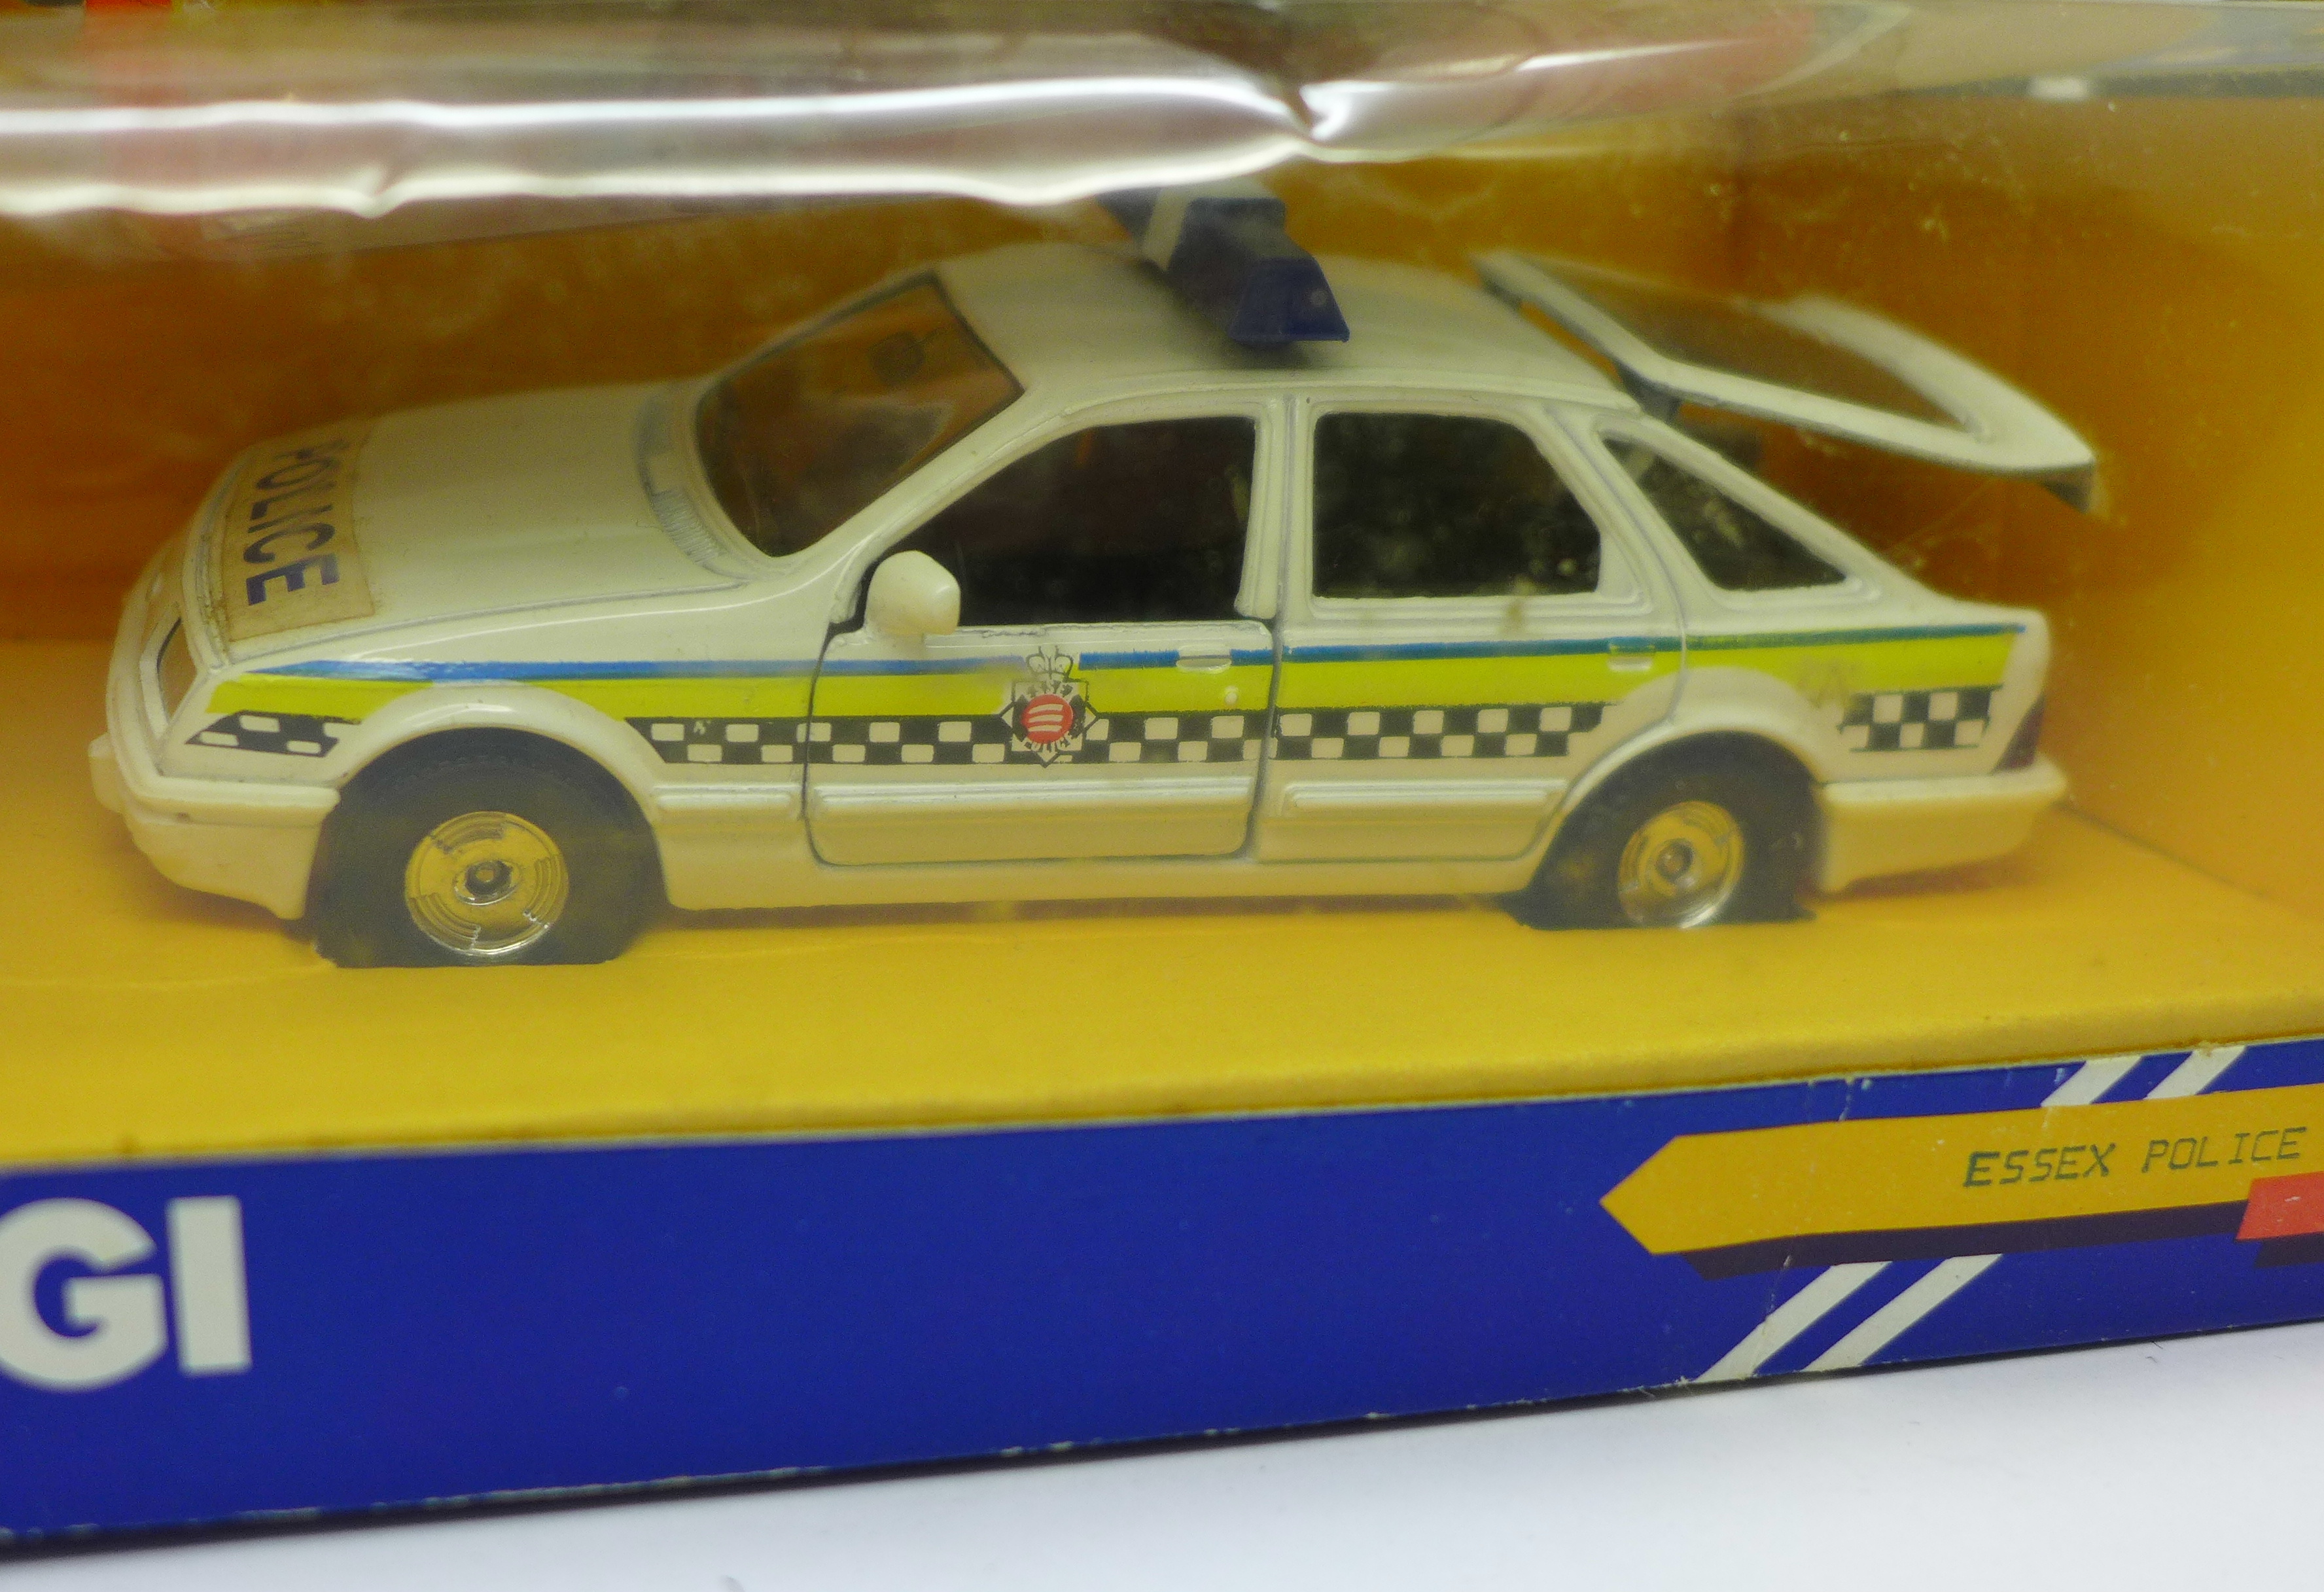 Four Corgi Toys die-cast model vehicles, including Rolls Royce Silver Shadow, in original boxes - Image 4 of 6